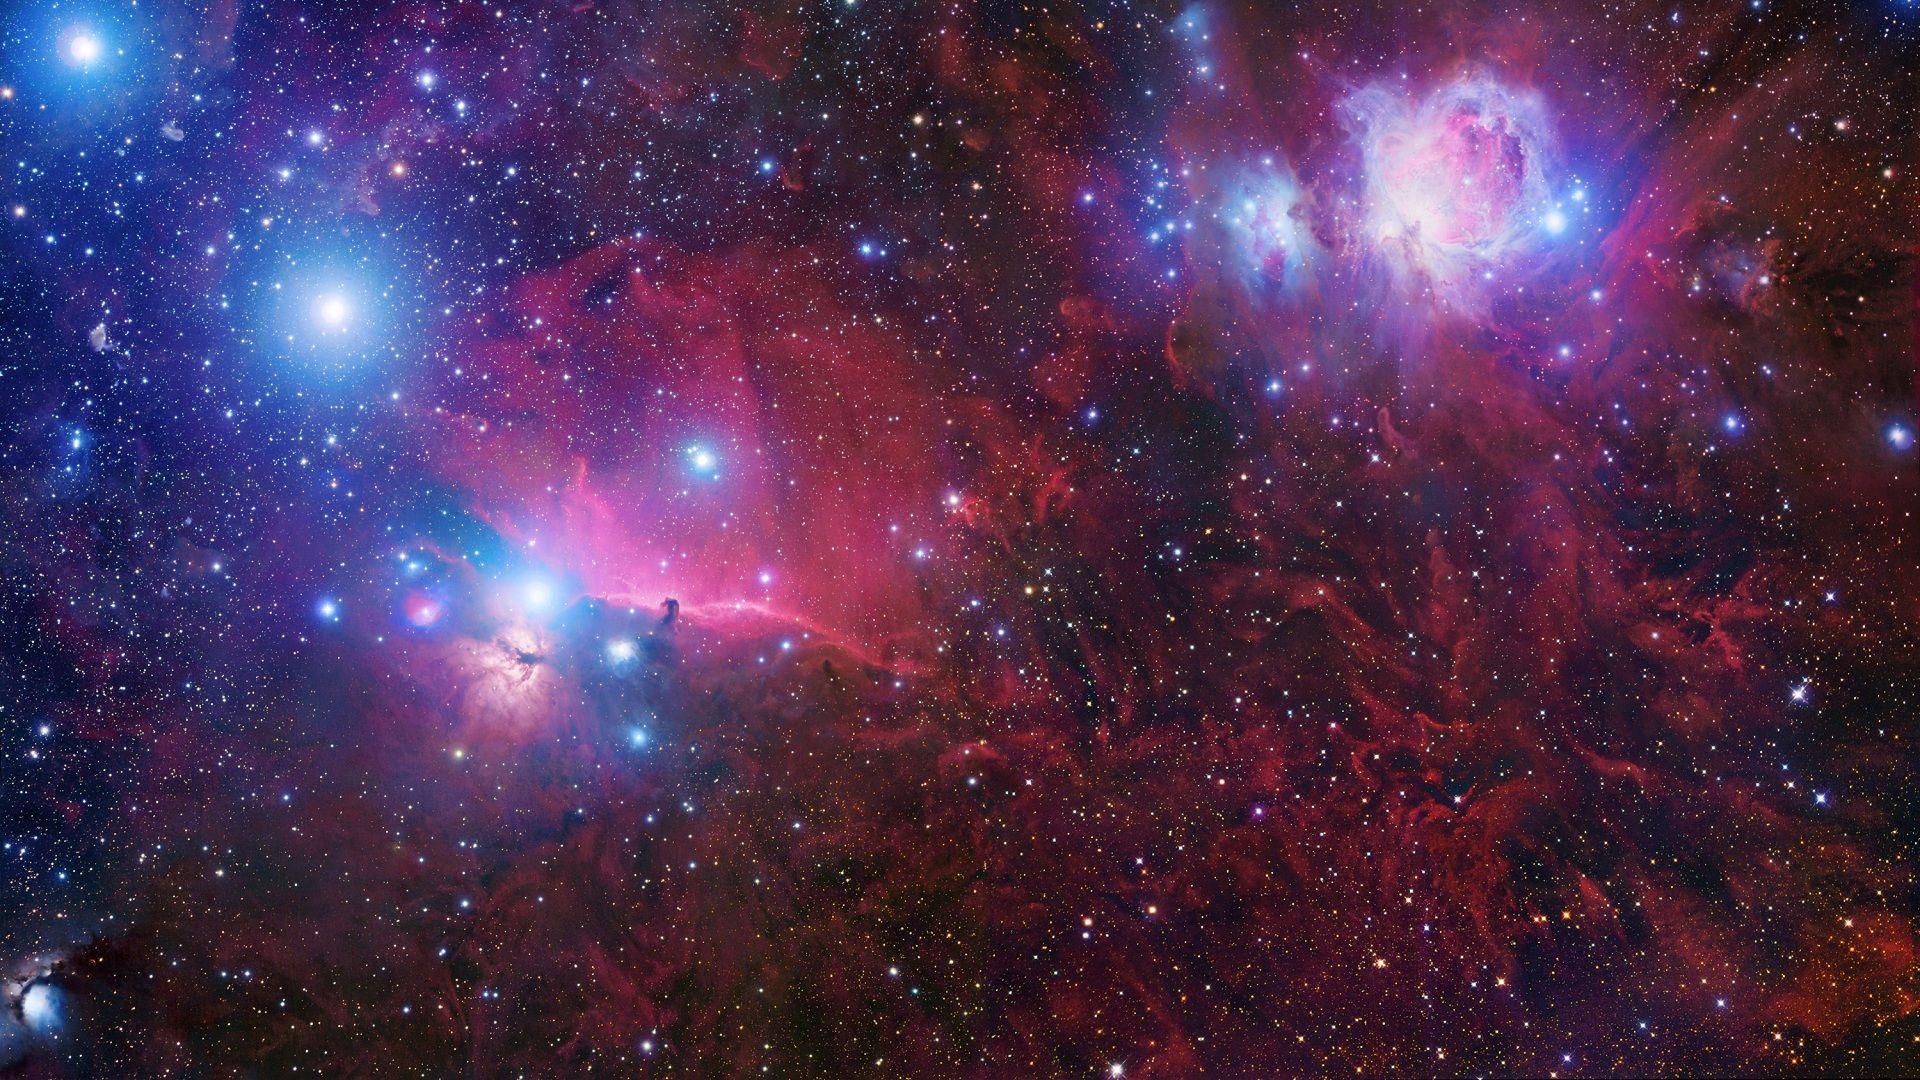 Orion [1920x1080]